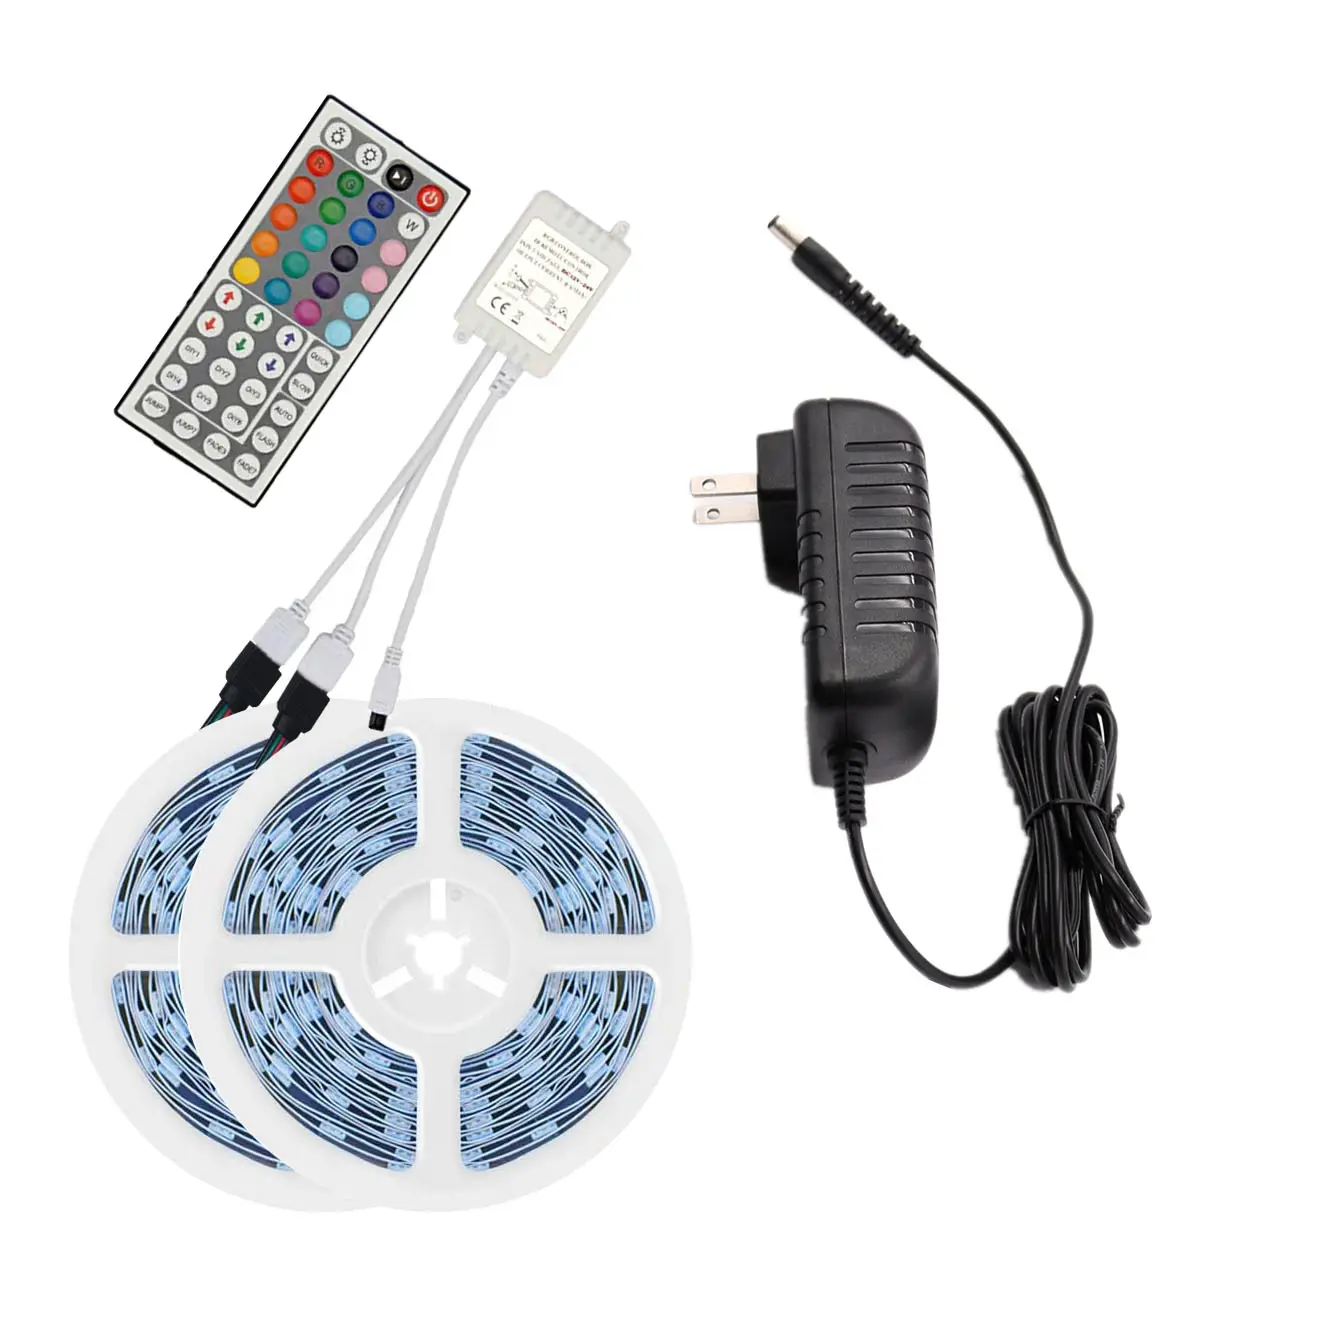 color changing led strips 32.8ft 10M 300 LEDs 5050 RGB Light with 44 Key Remote Controller Extra Adhesive 3M Tape